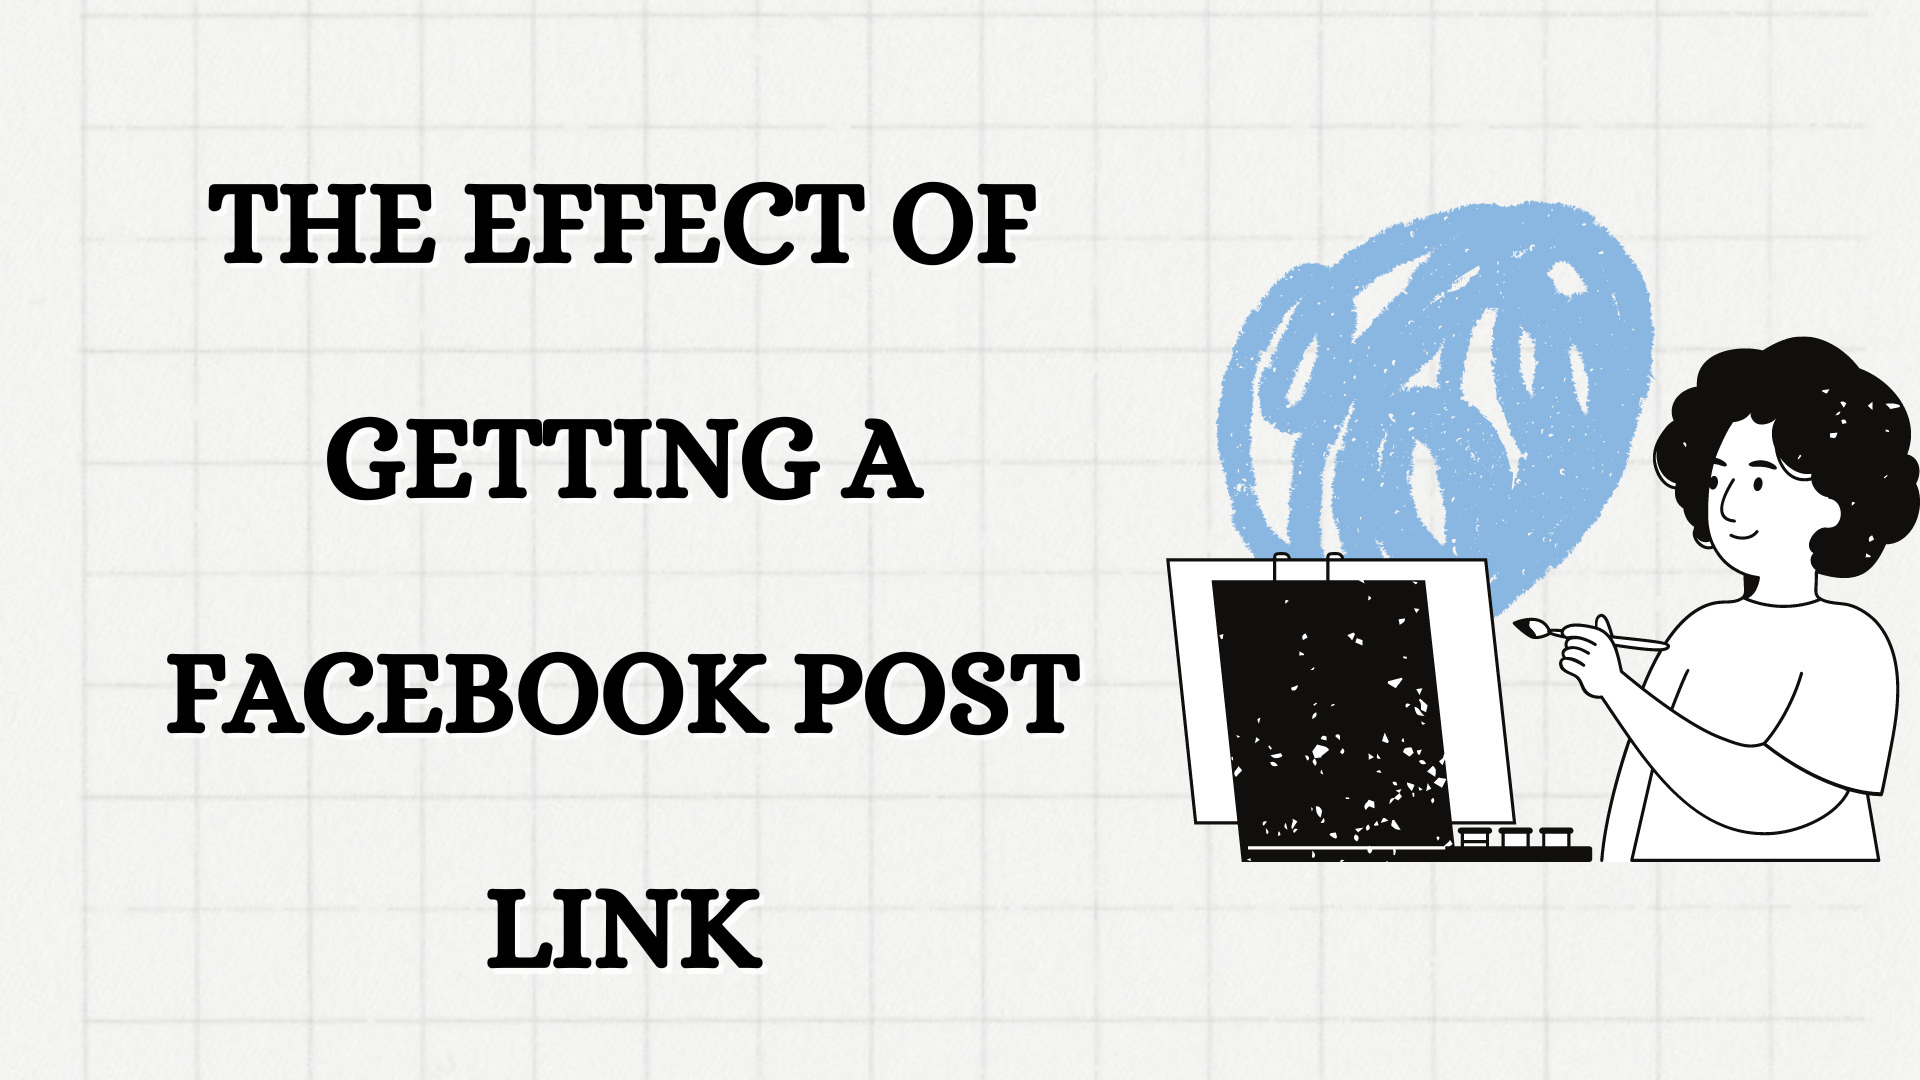 The effect of getting a Facebook post link